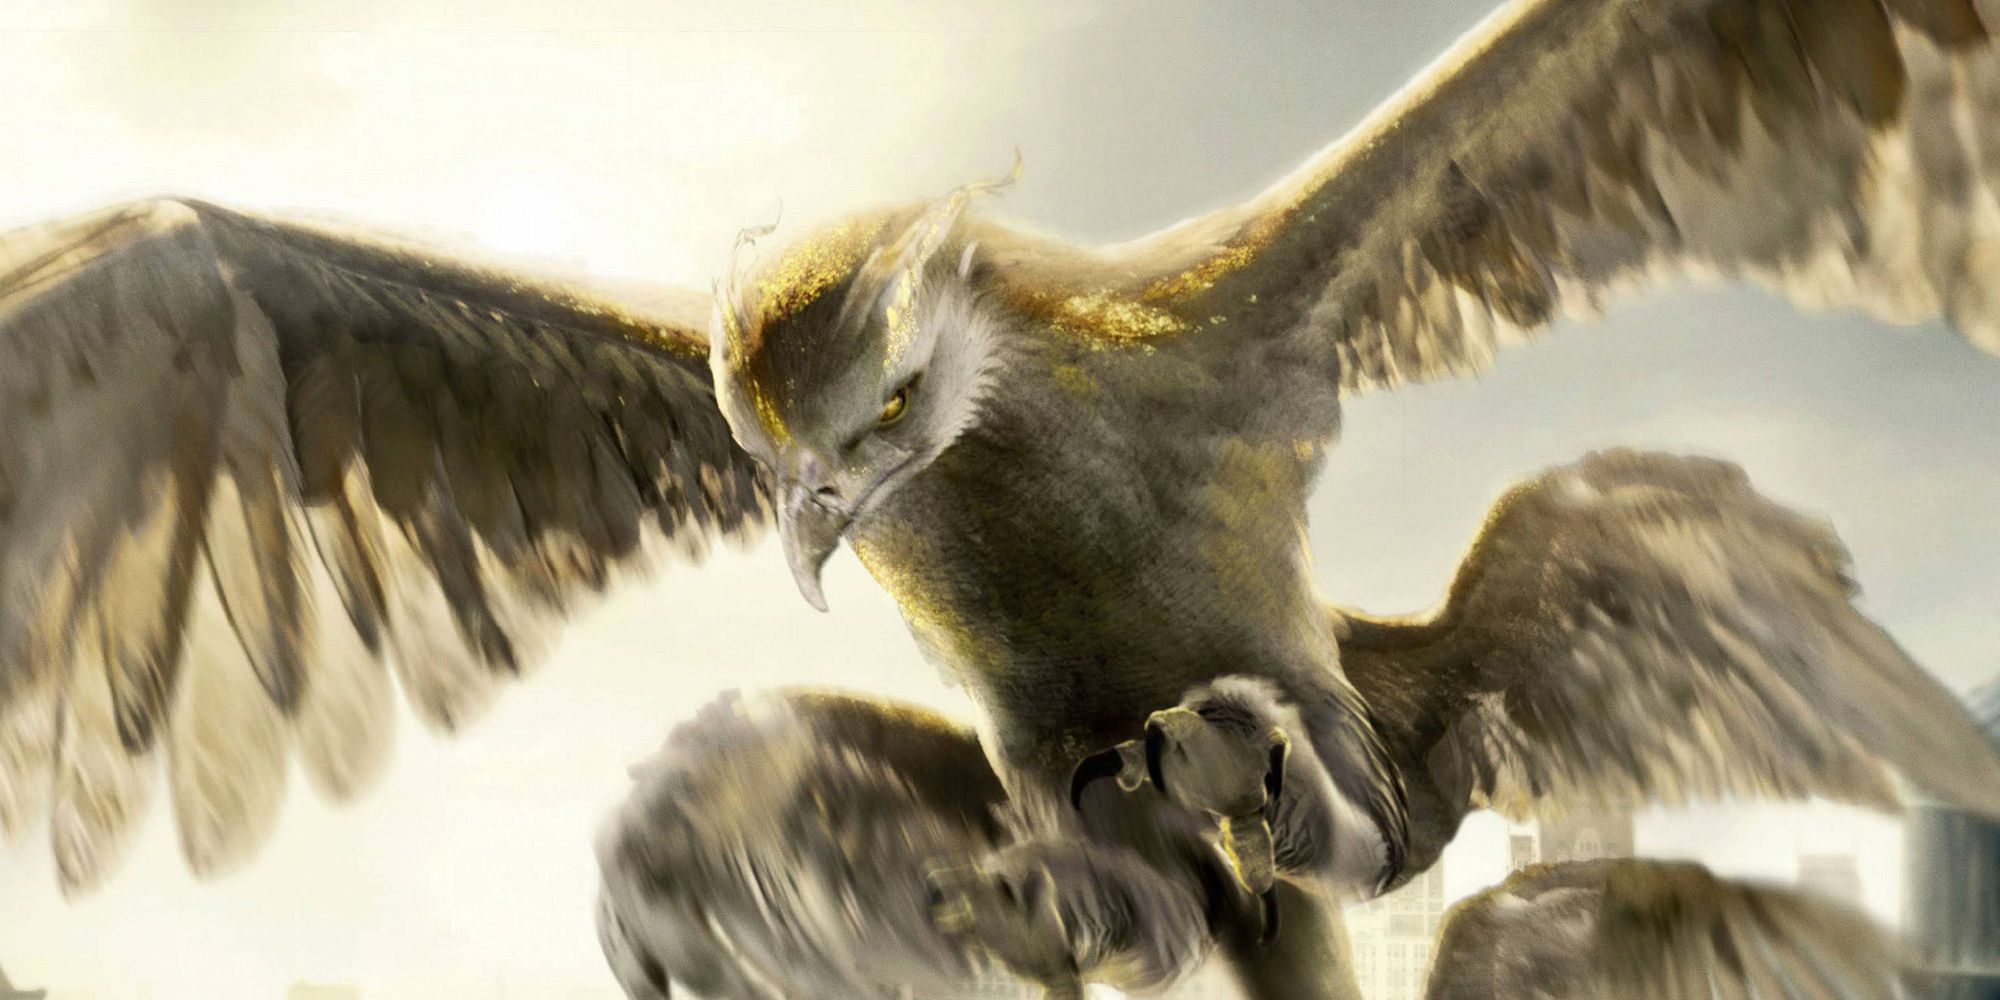 The Thunderbird flying in Fantastic Beasts and Where to Find Them